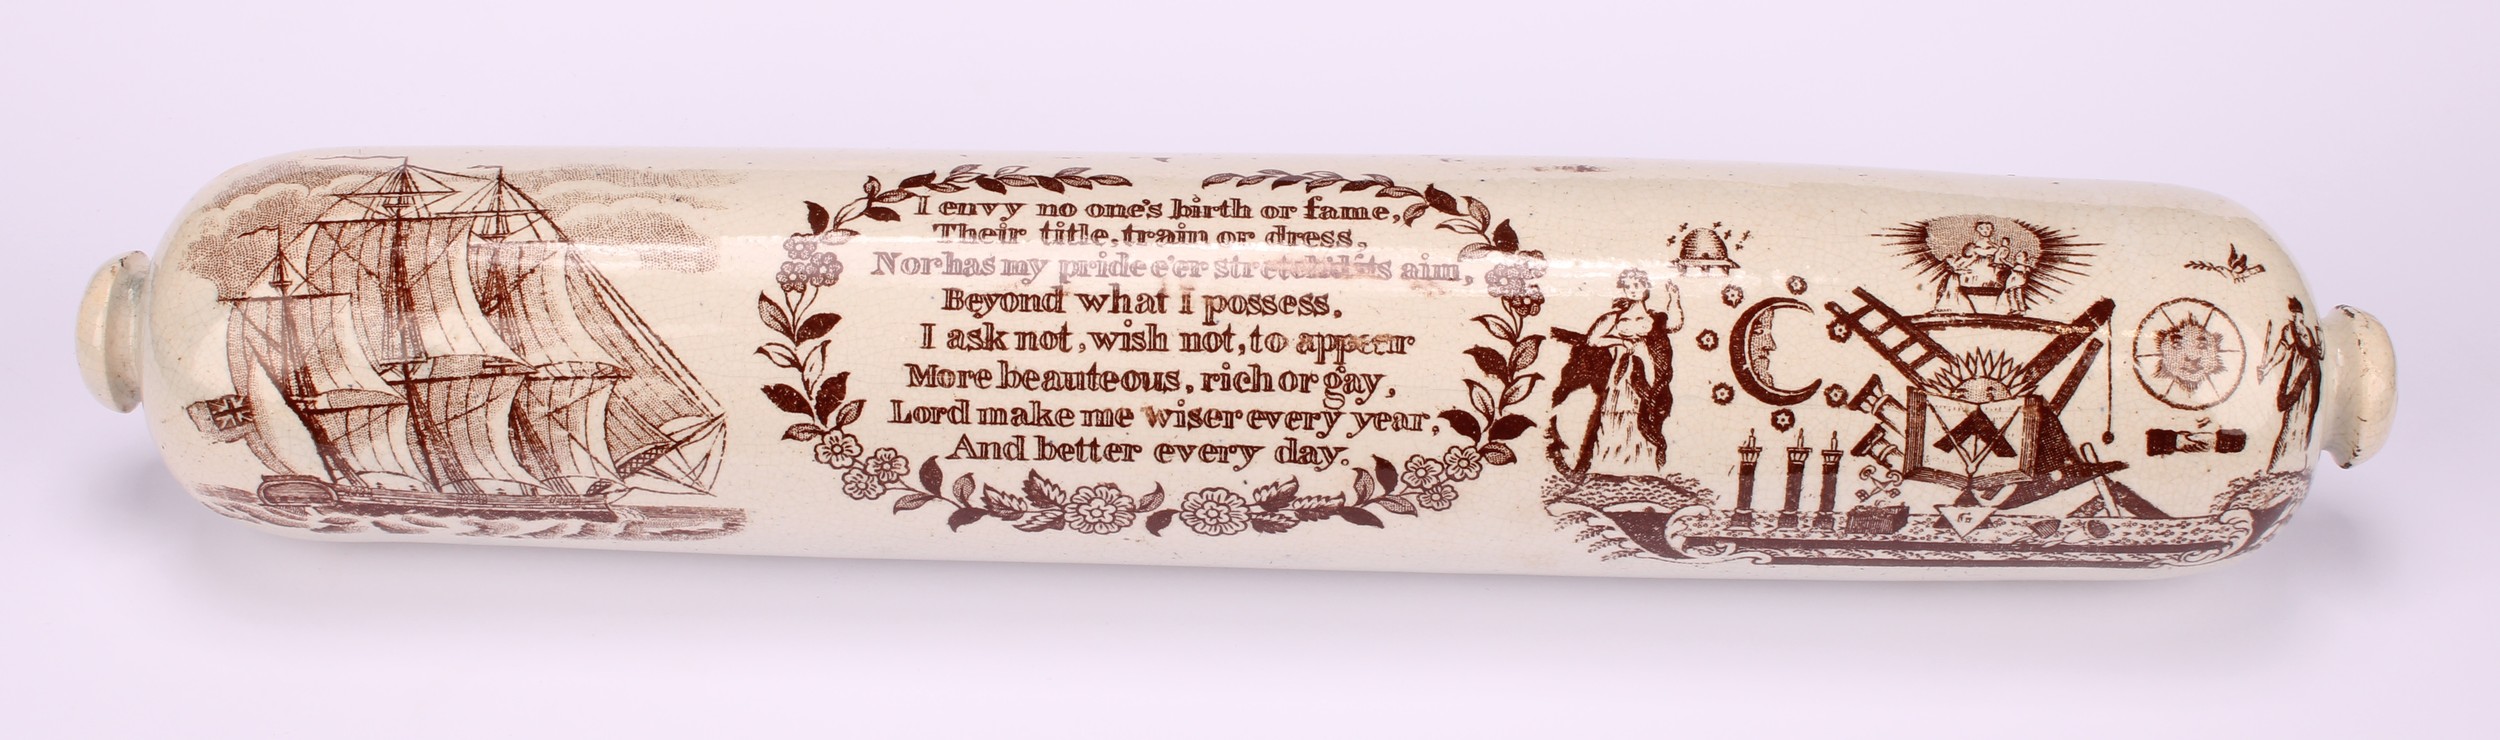 A Sunderland Masonic rolling pin, printed in sepia tones, I envy no one's birth or fame..., with - Image 2 of 3